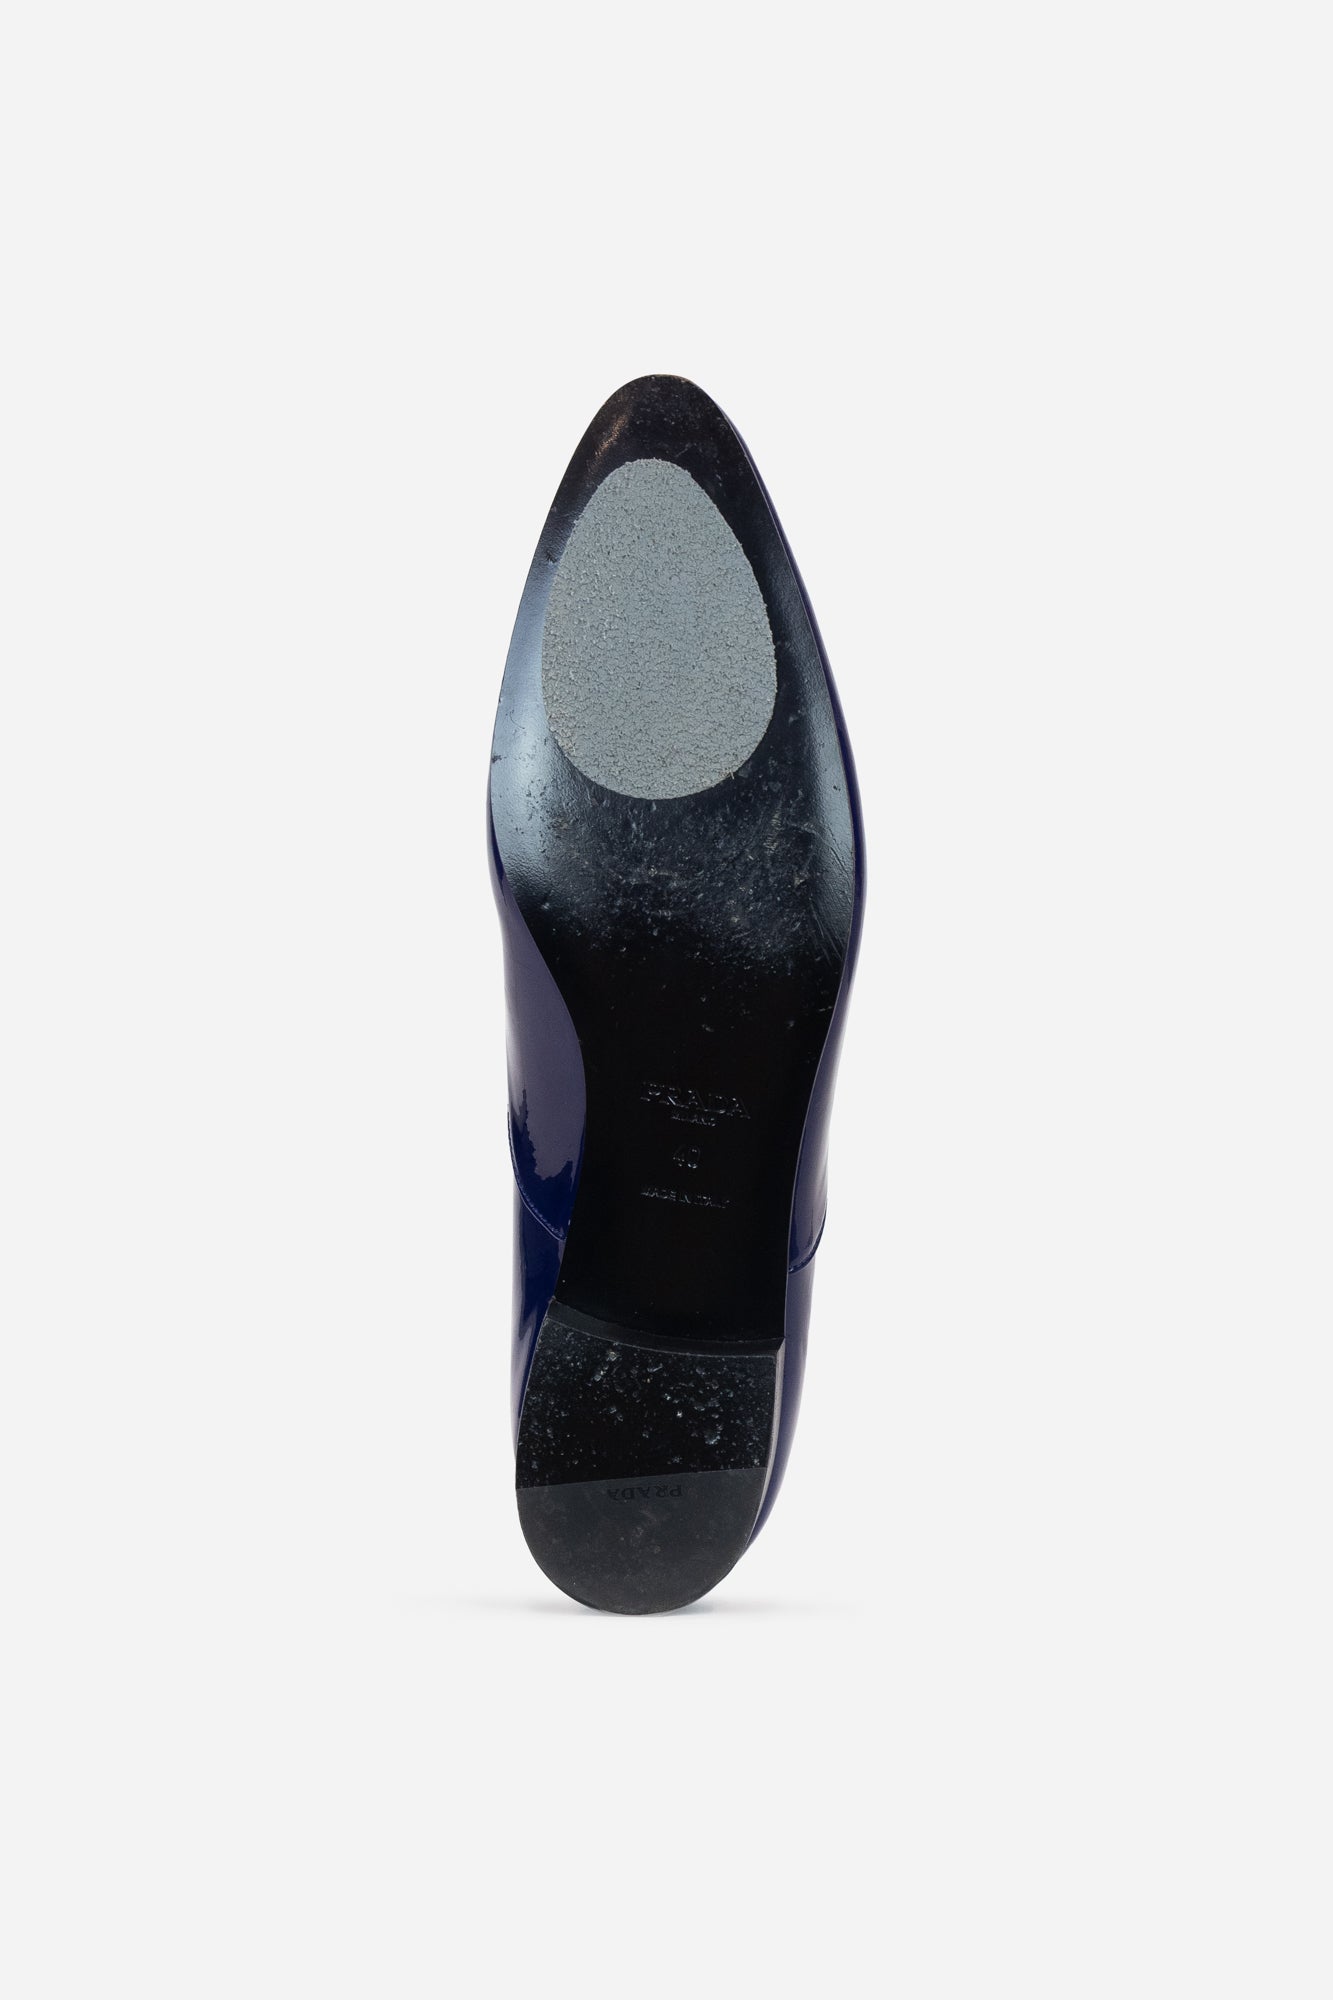 Royal Blue Patent Leather Pointed Toe Loafers